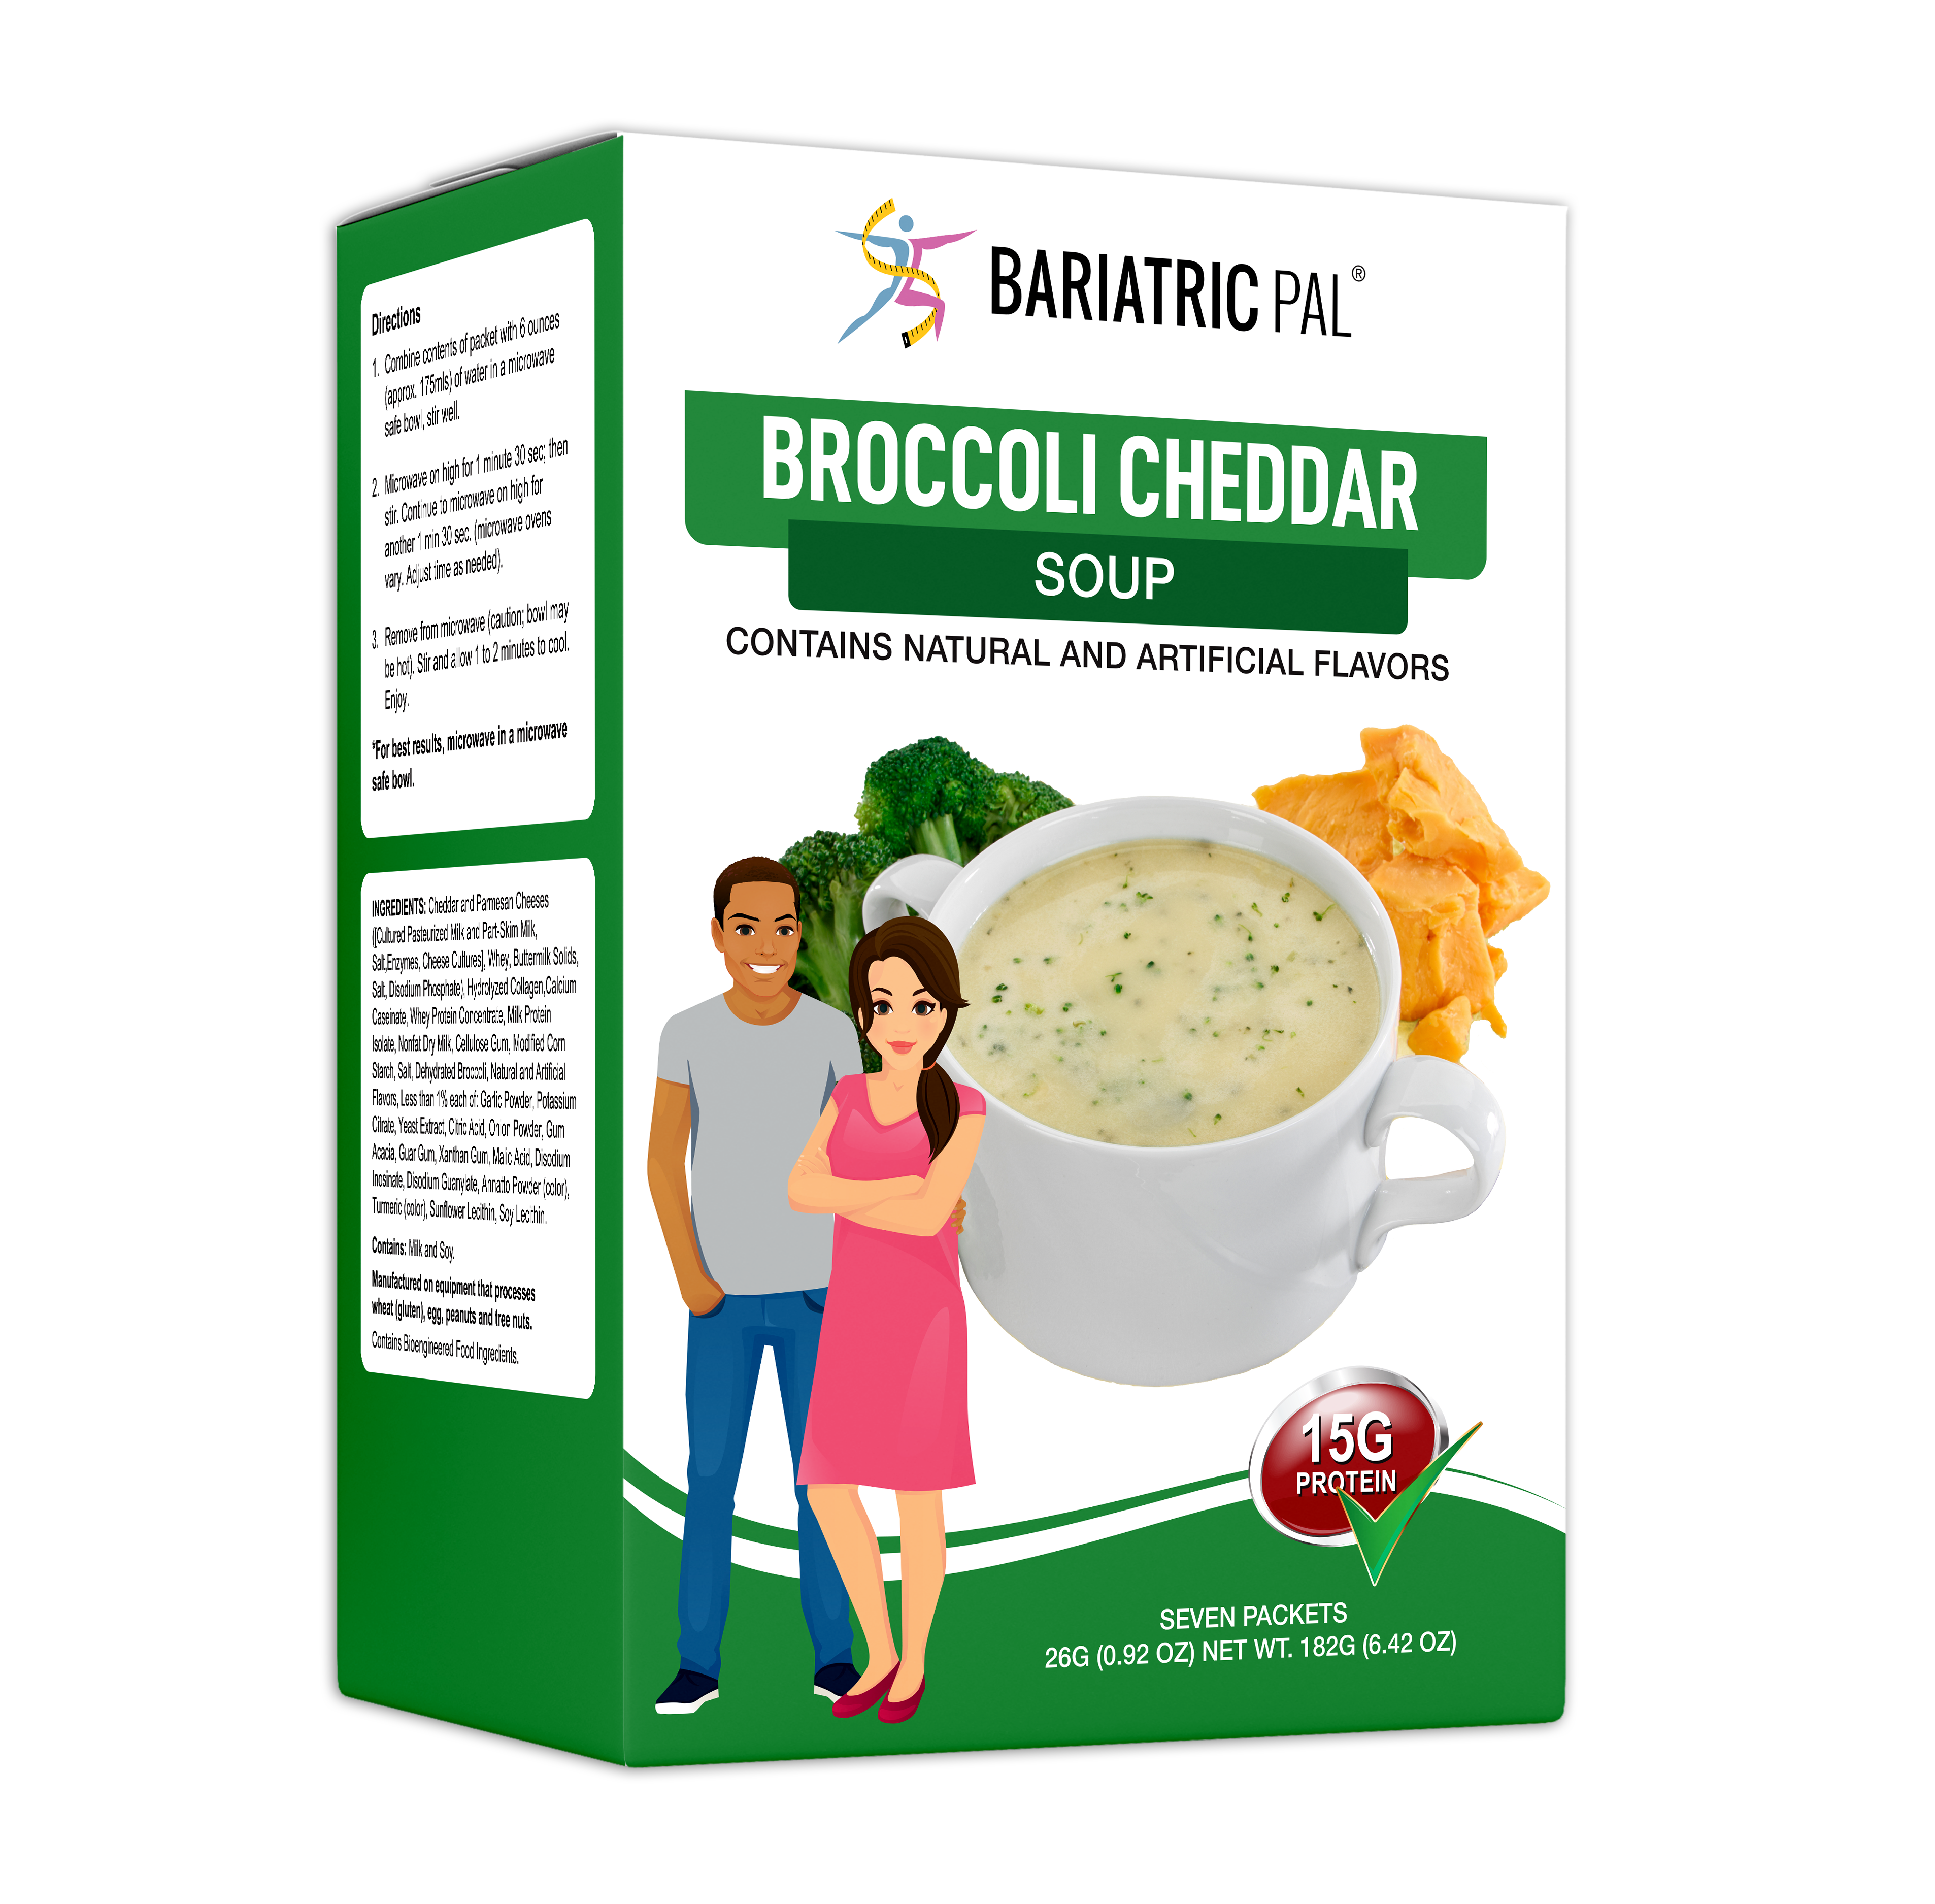 BariatricPal High Protein Meal Replacement Soup - Broccoli and Cheese - High-quality Soups by BariatricPal at 